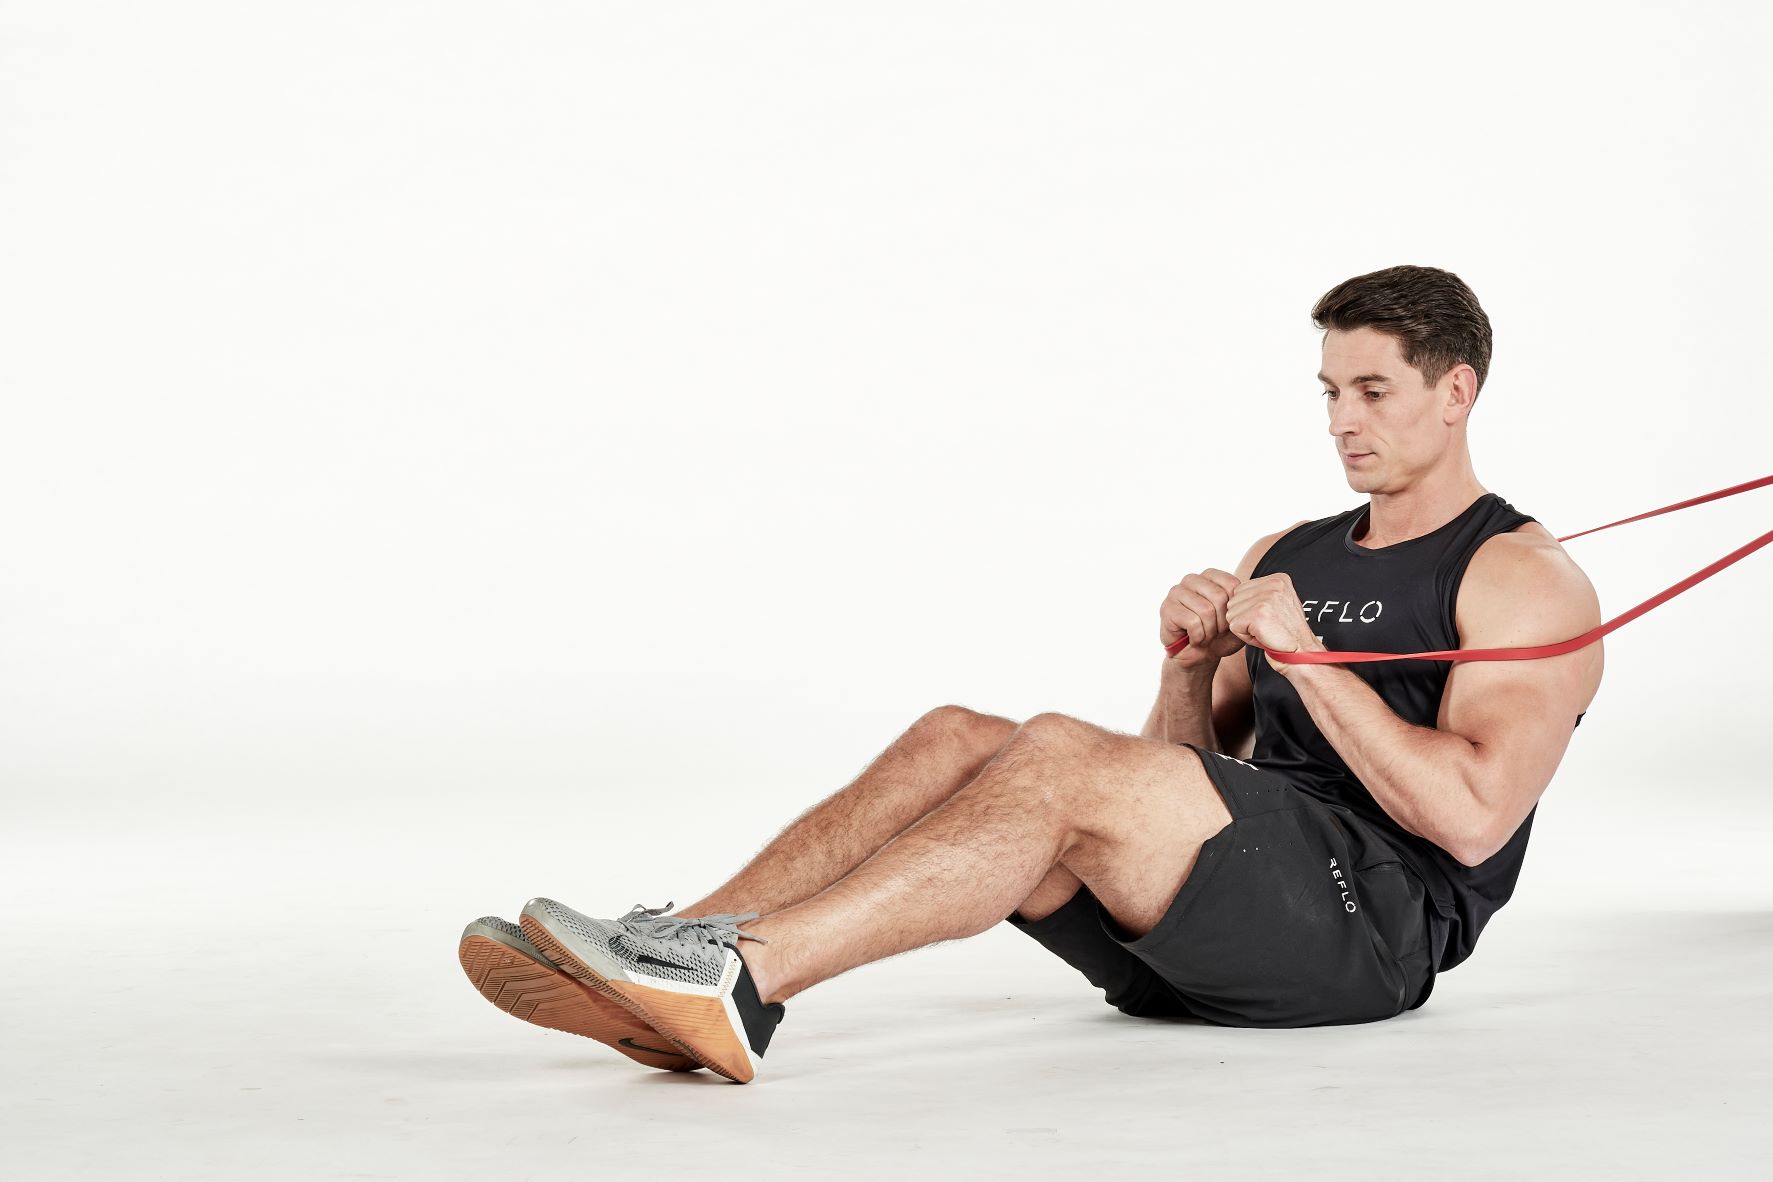 man demonstrating step one of russian twist; sitting down with knees bent, he holds a secured resistance band in his hands in front of his chest; he wears a black fitness vest, black shorts and trainers